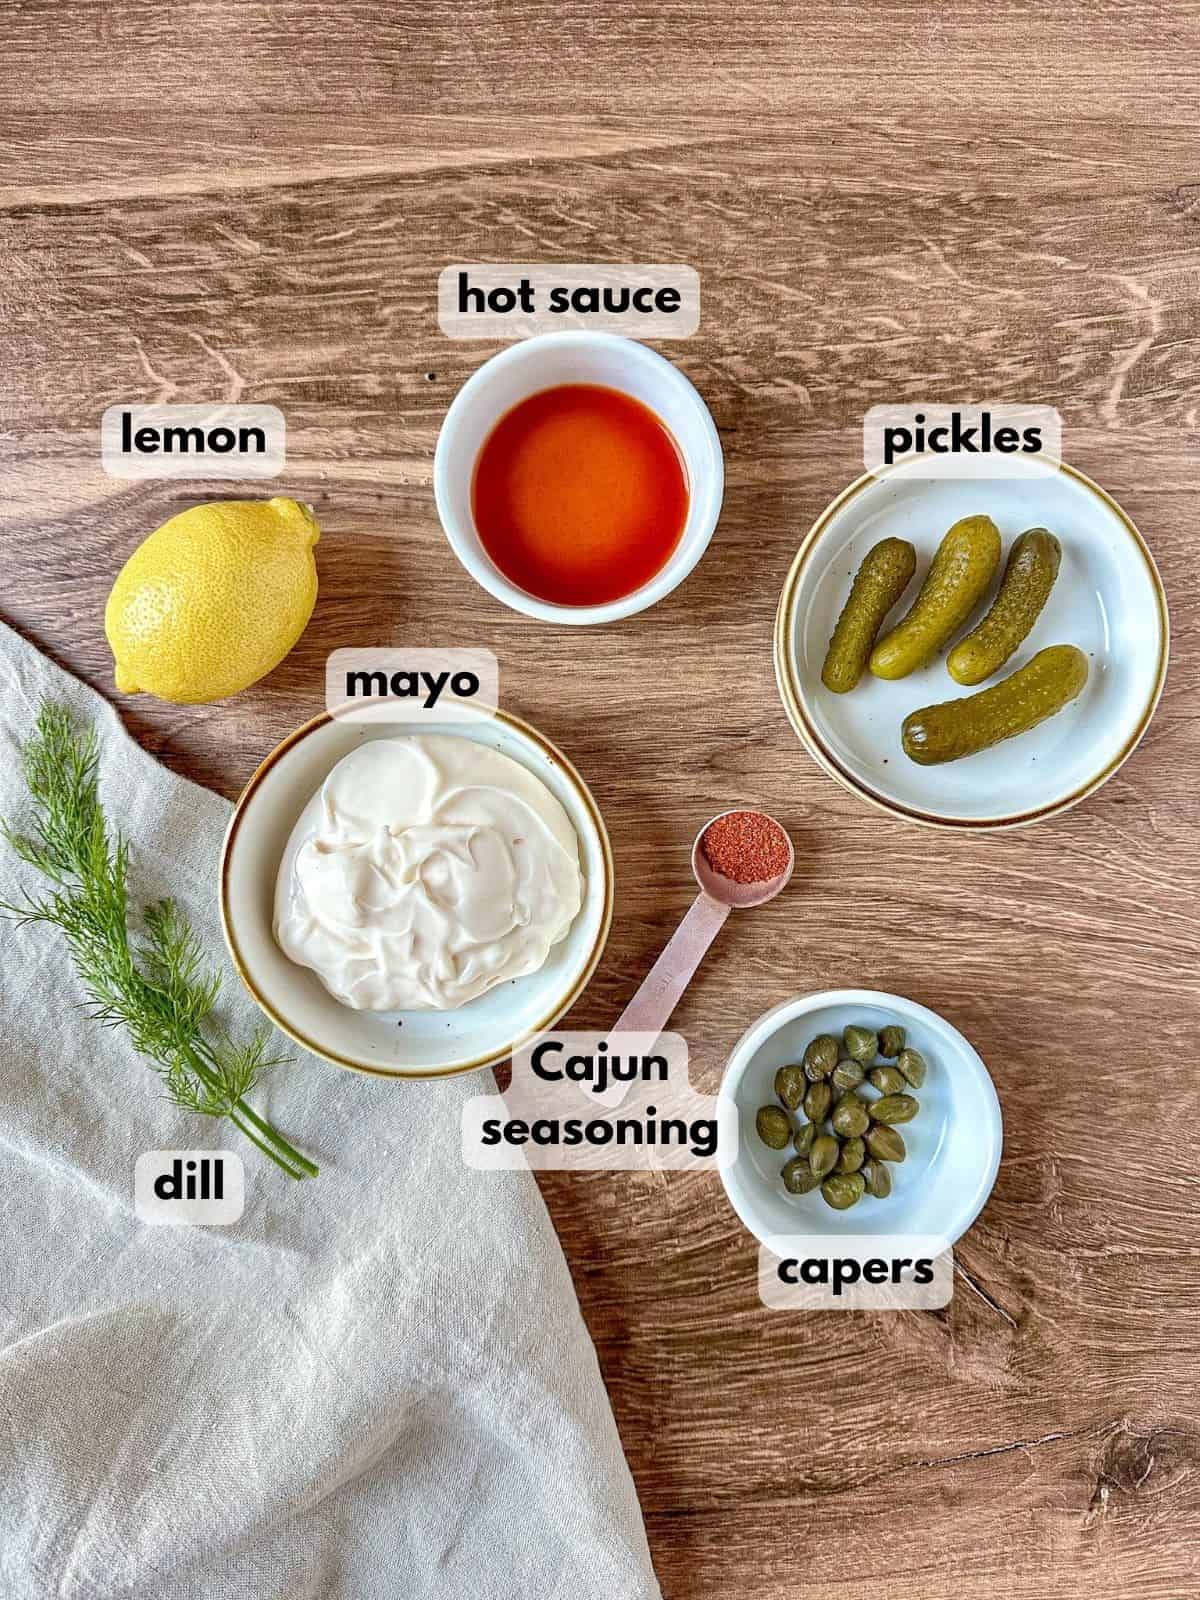 Cajun tartar sauce ingredients on a wooden table: mayo, pickles, capers, hot sauce, dill, seasonings, and a lemon.